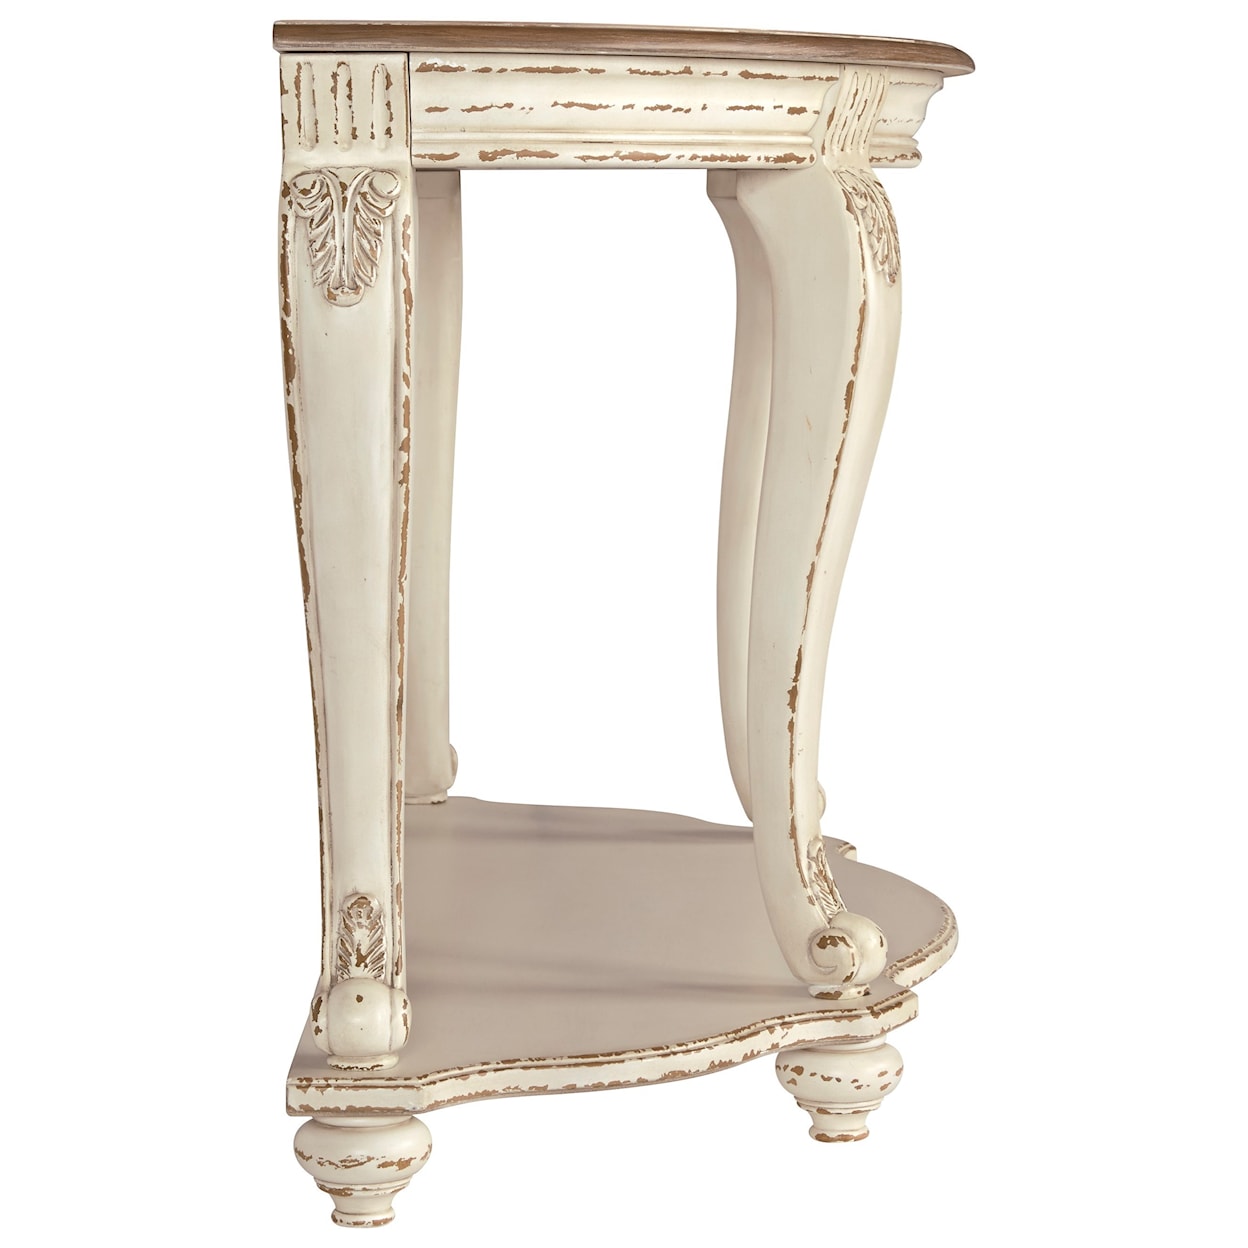 Signature Design by Ashley Furniture Realyn Sofa Table